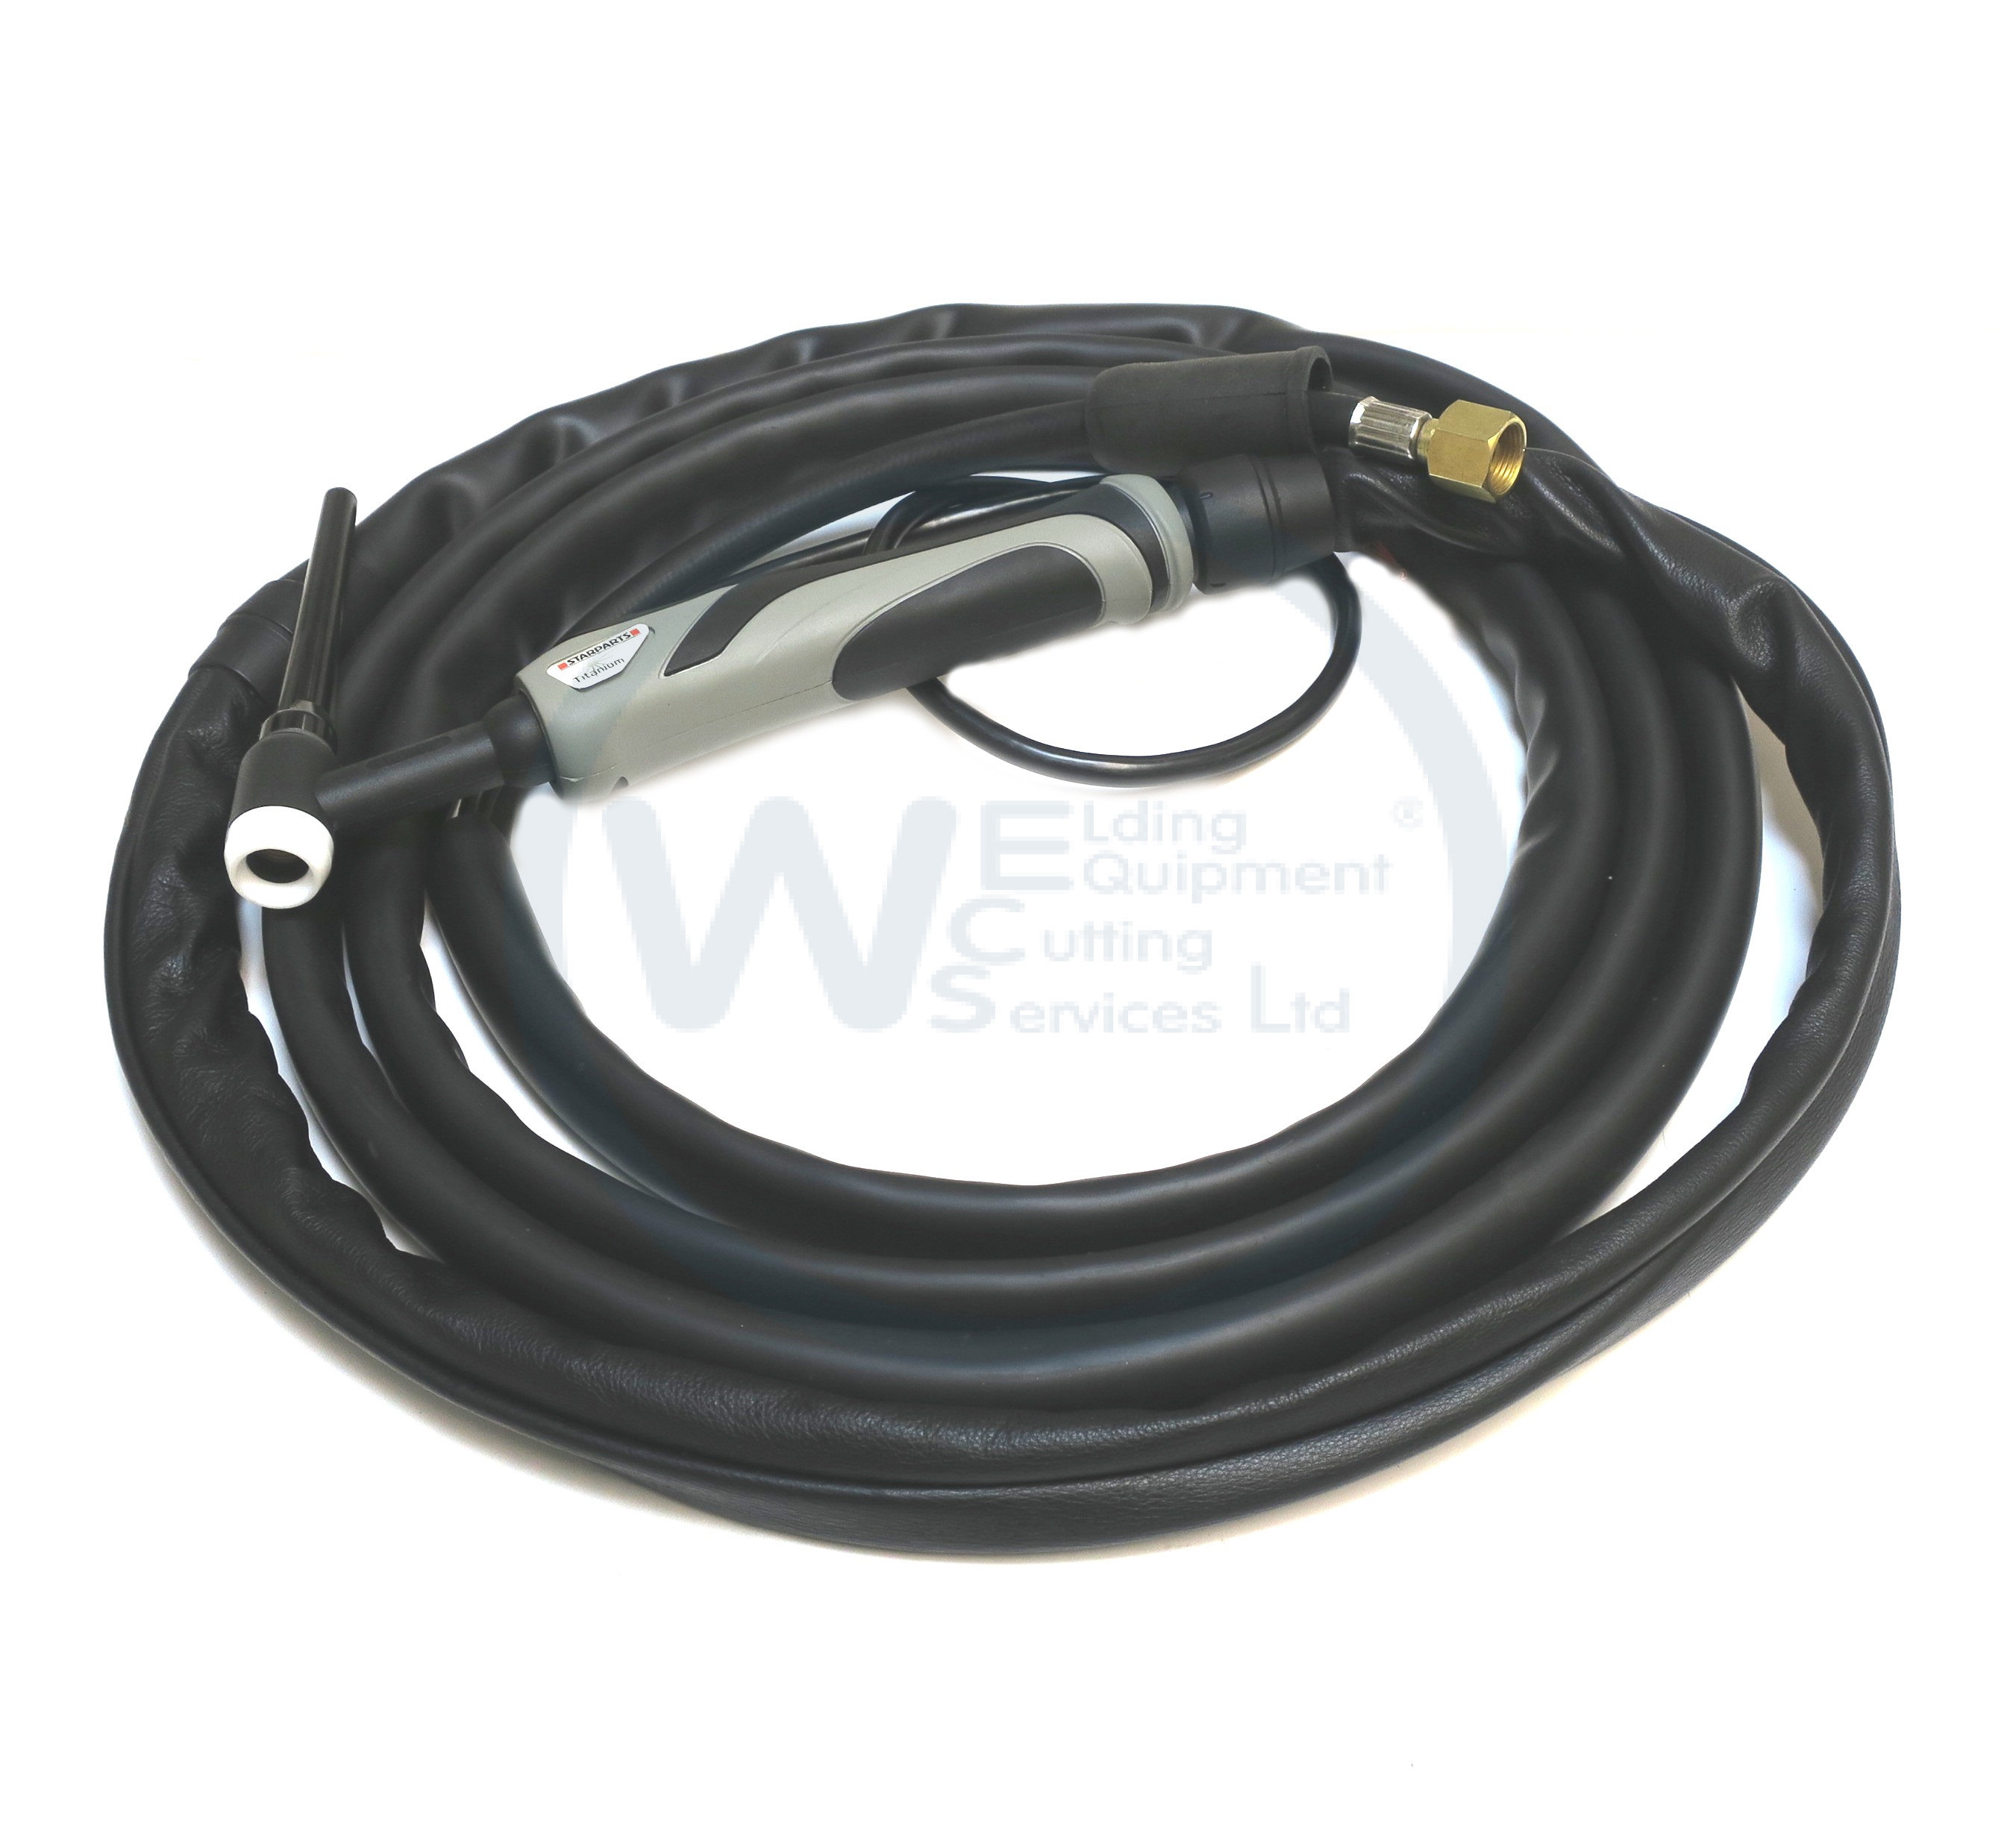 Starparts Titanium WP20 12 or 25ft 35/50 Welding Connection or BSP 10/25 